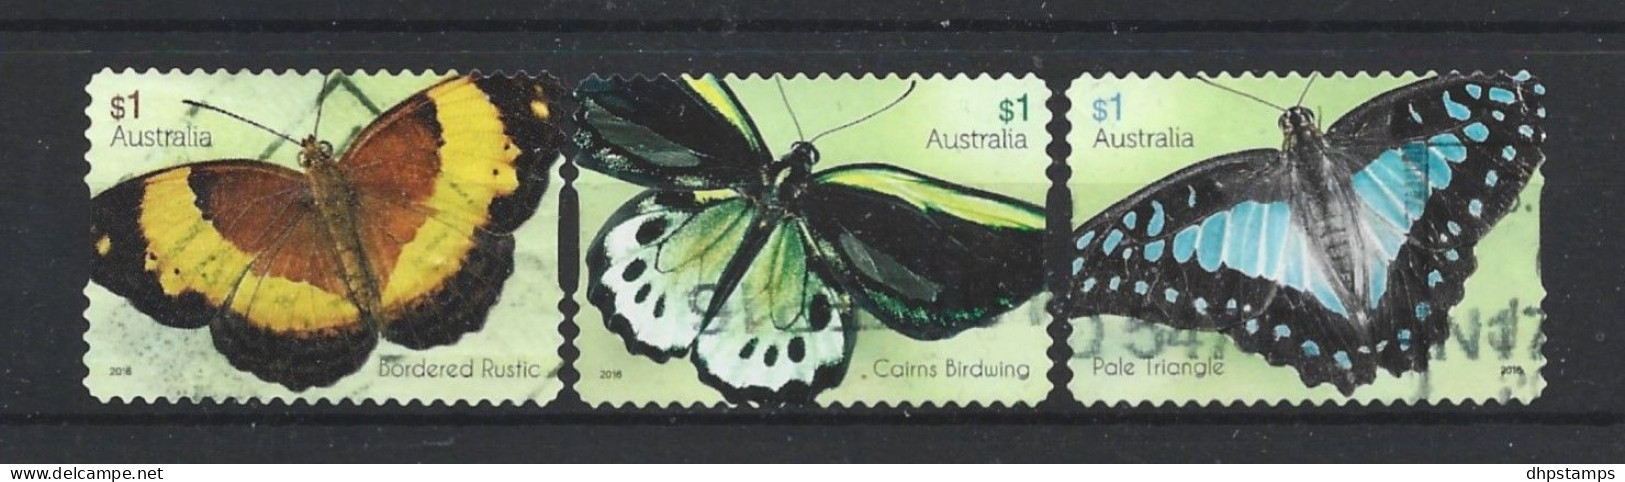 Australia 2016 Butterflies S.A. Y.T. 4324/4326 (0) - Used Stamps